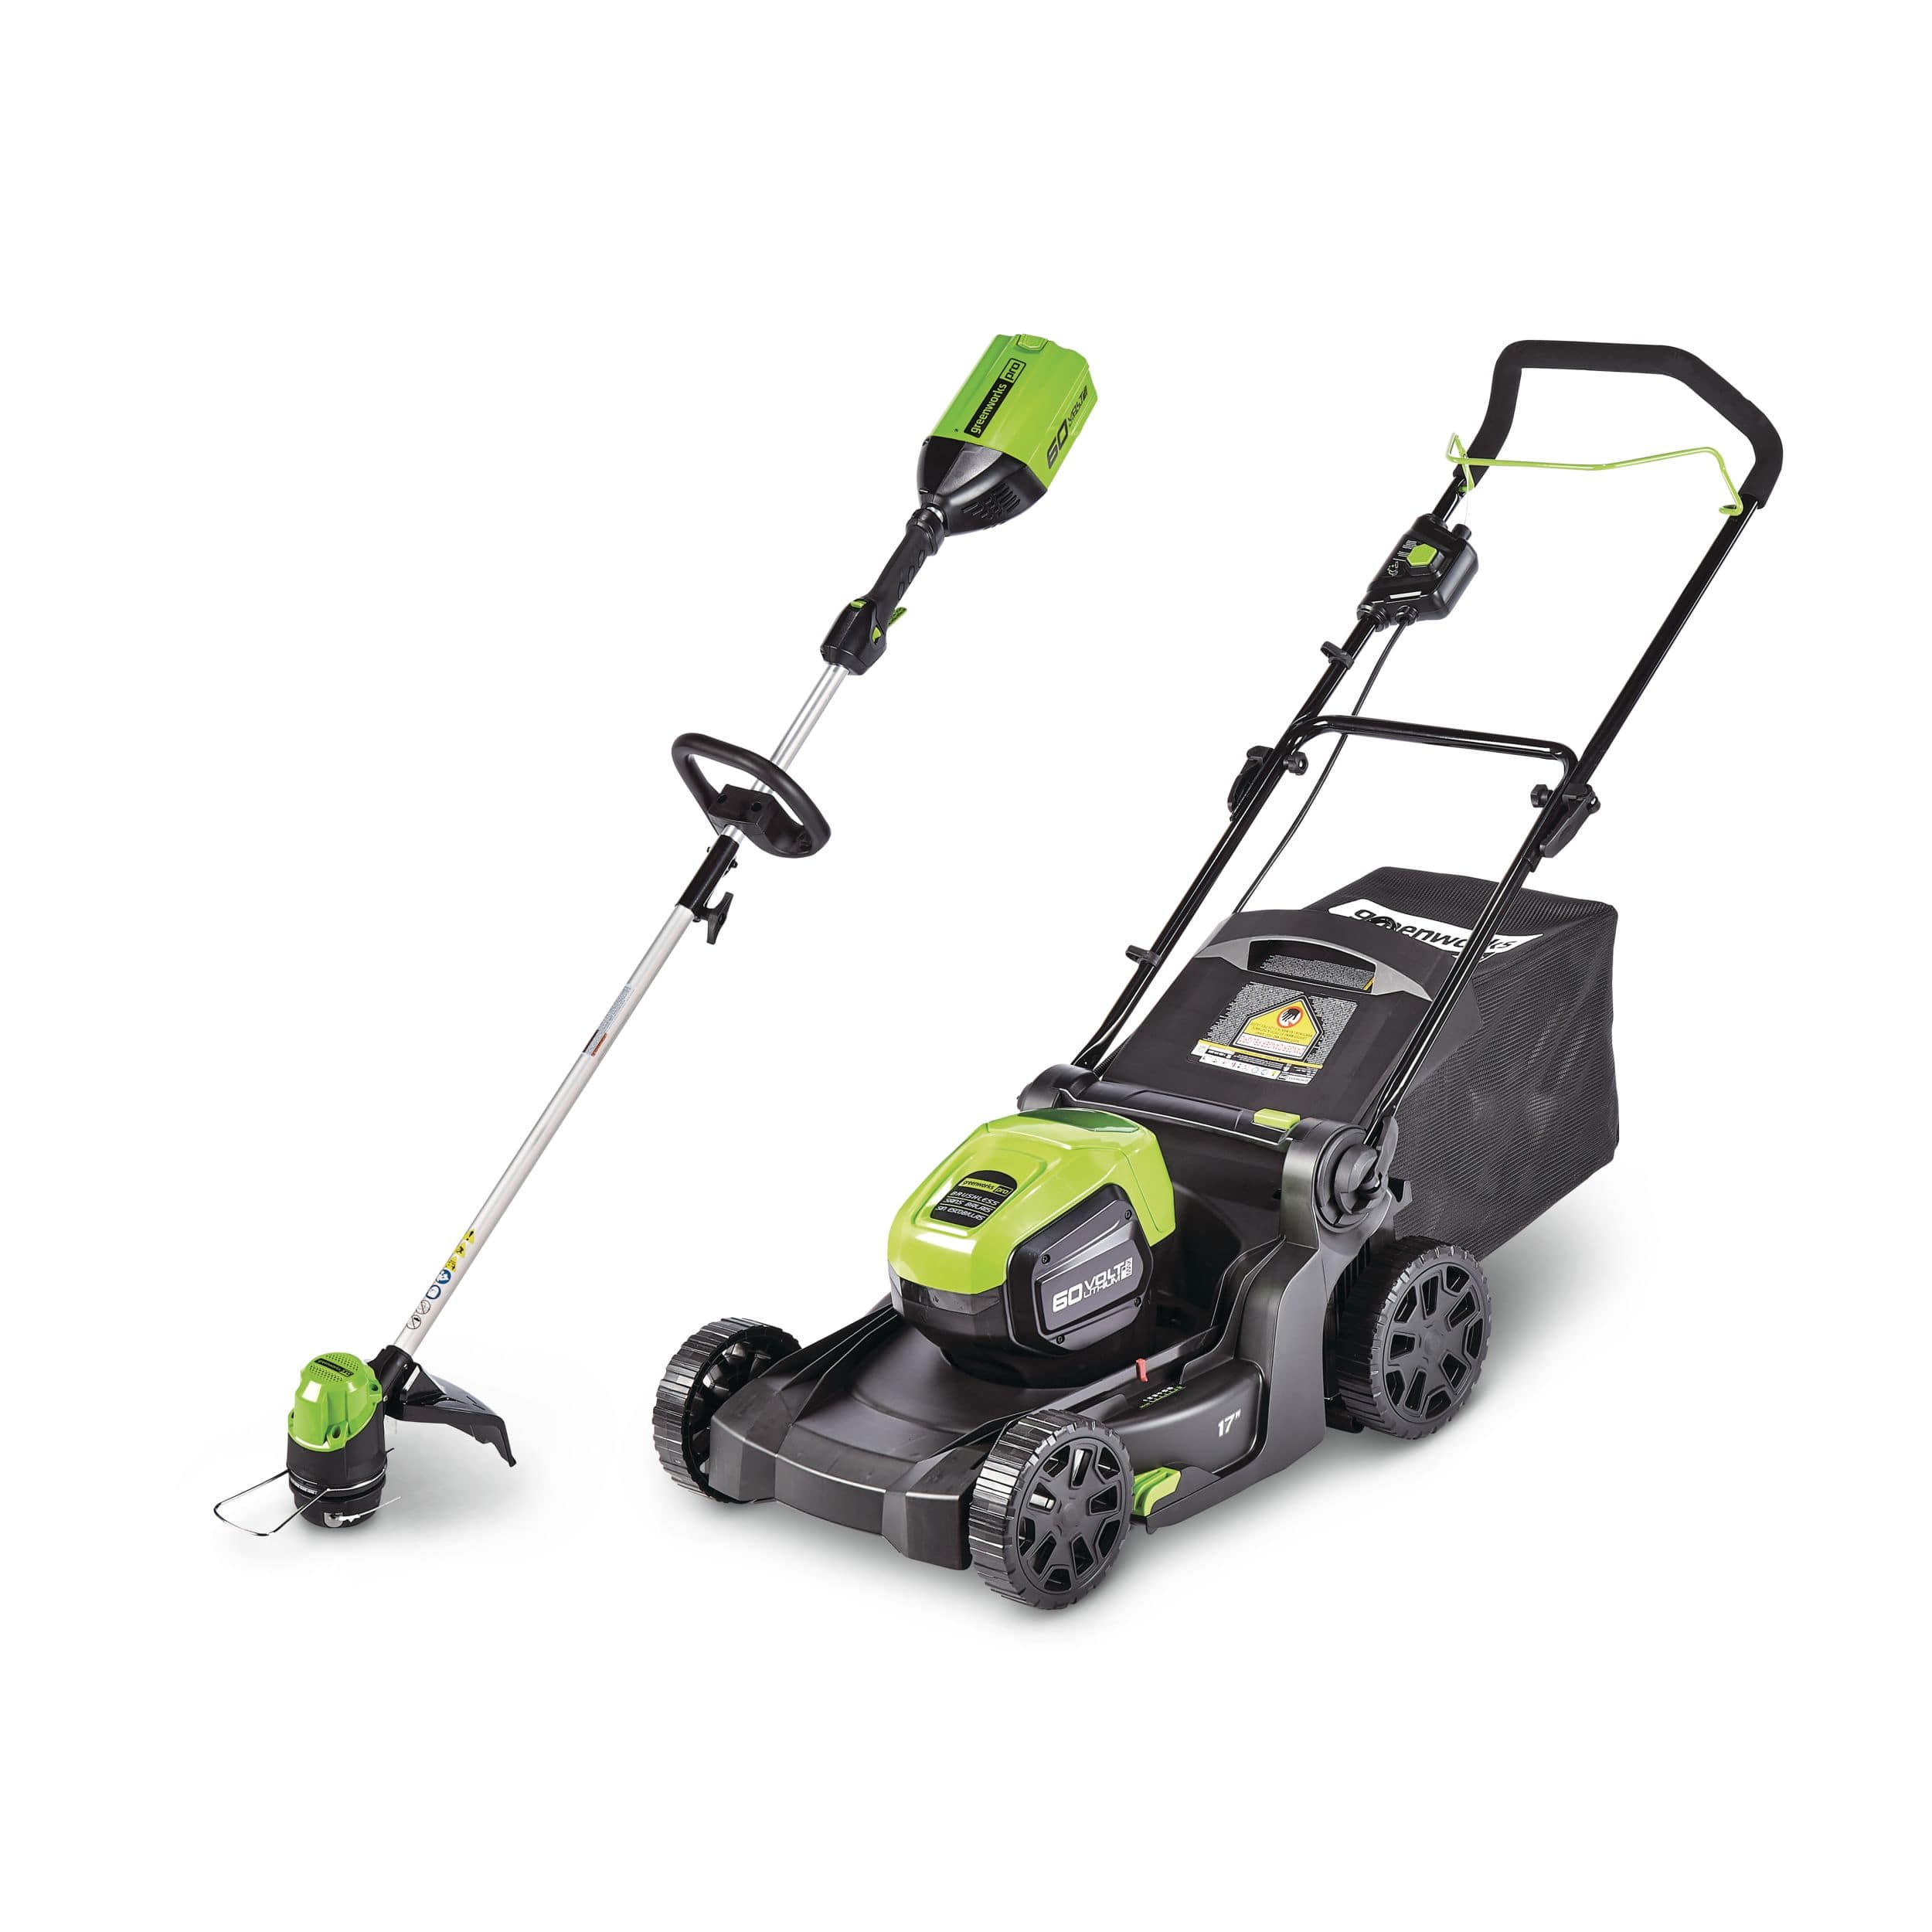 https://media-www.canadiantire.ca/product/seasonal-gardening/outdoor-tools/lawn-mowers-tractors/3995438/greenworks-60v-mower-trimmer-combo-kit-cf16d9e5-5820-4a7d-8023-2fcb828aff76-jpgrendition.jpg